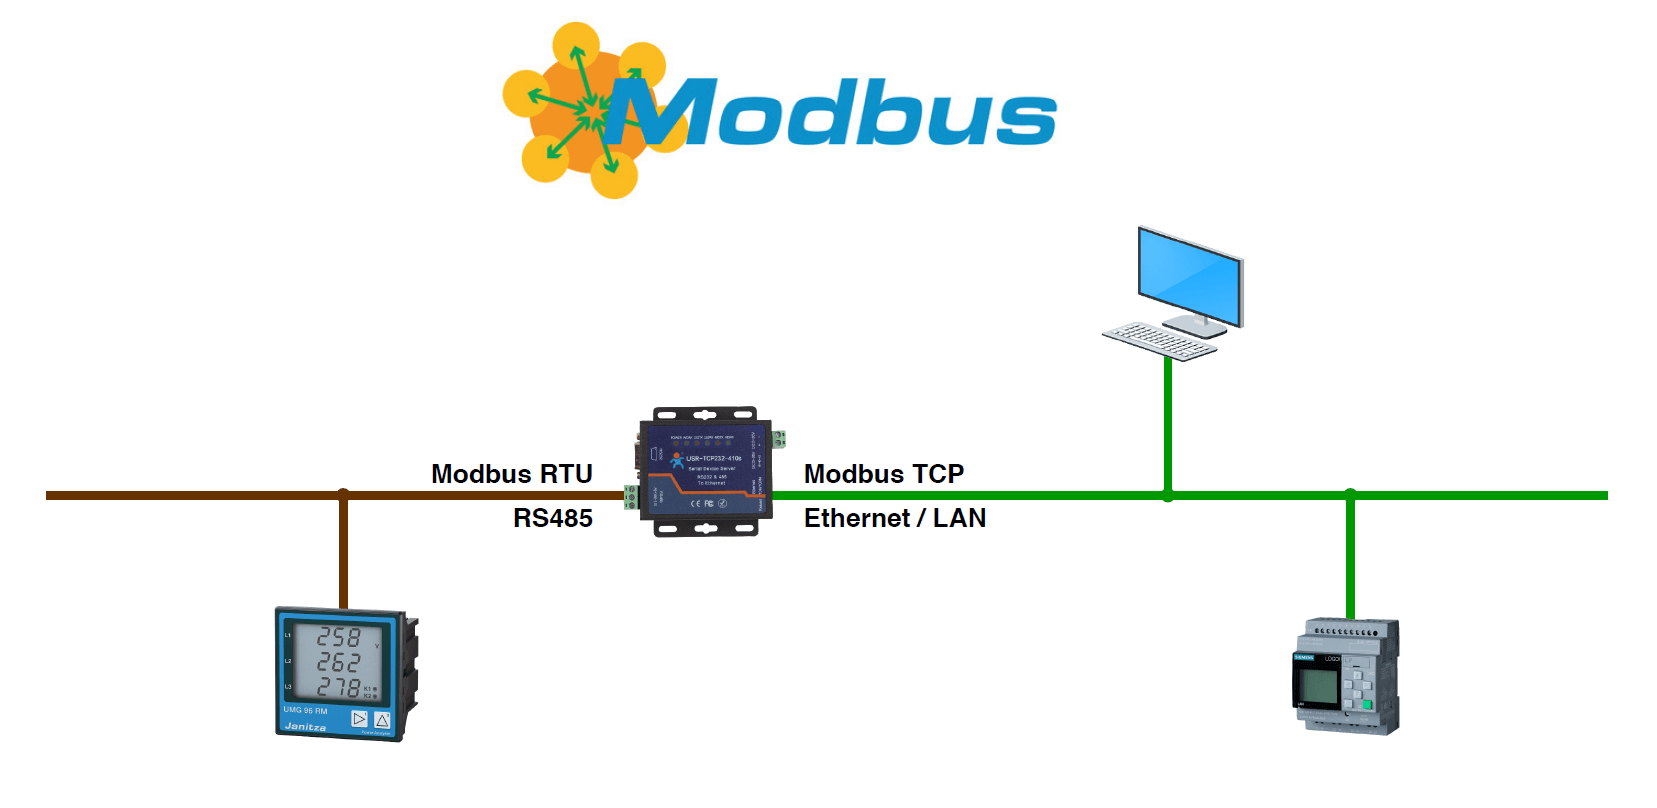 SS10580 - Converter from Modbus TCP Ethernet to Modbus RTU RS485